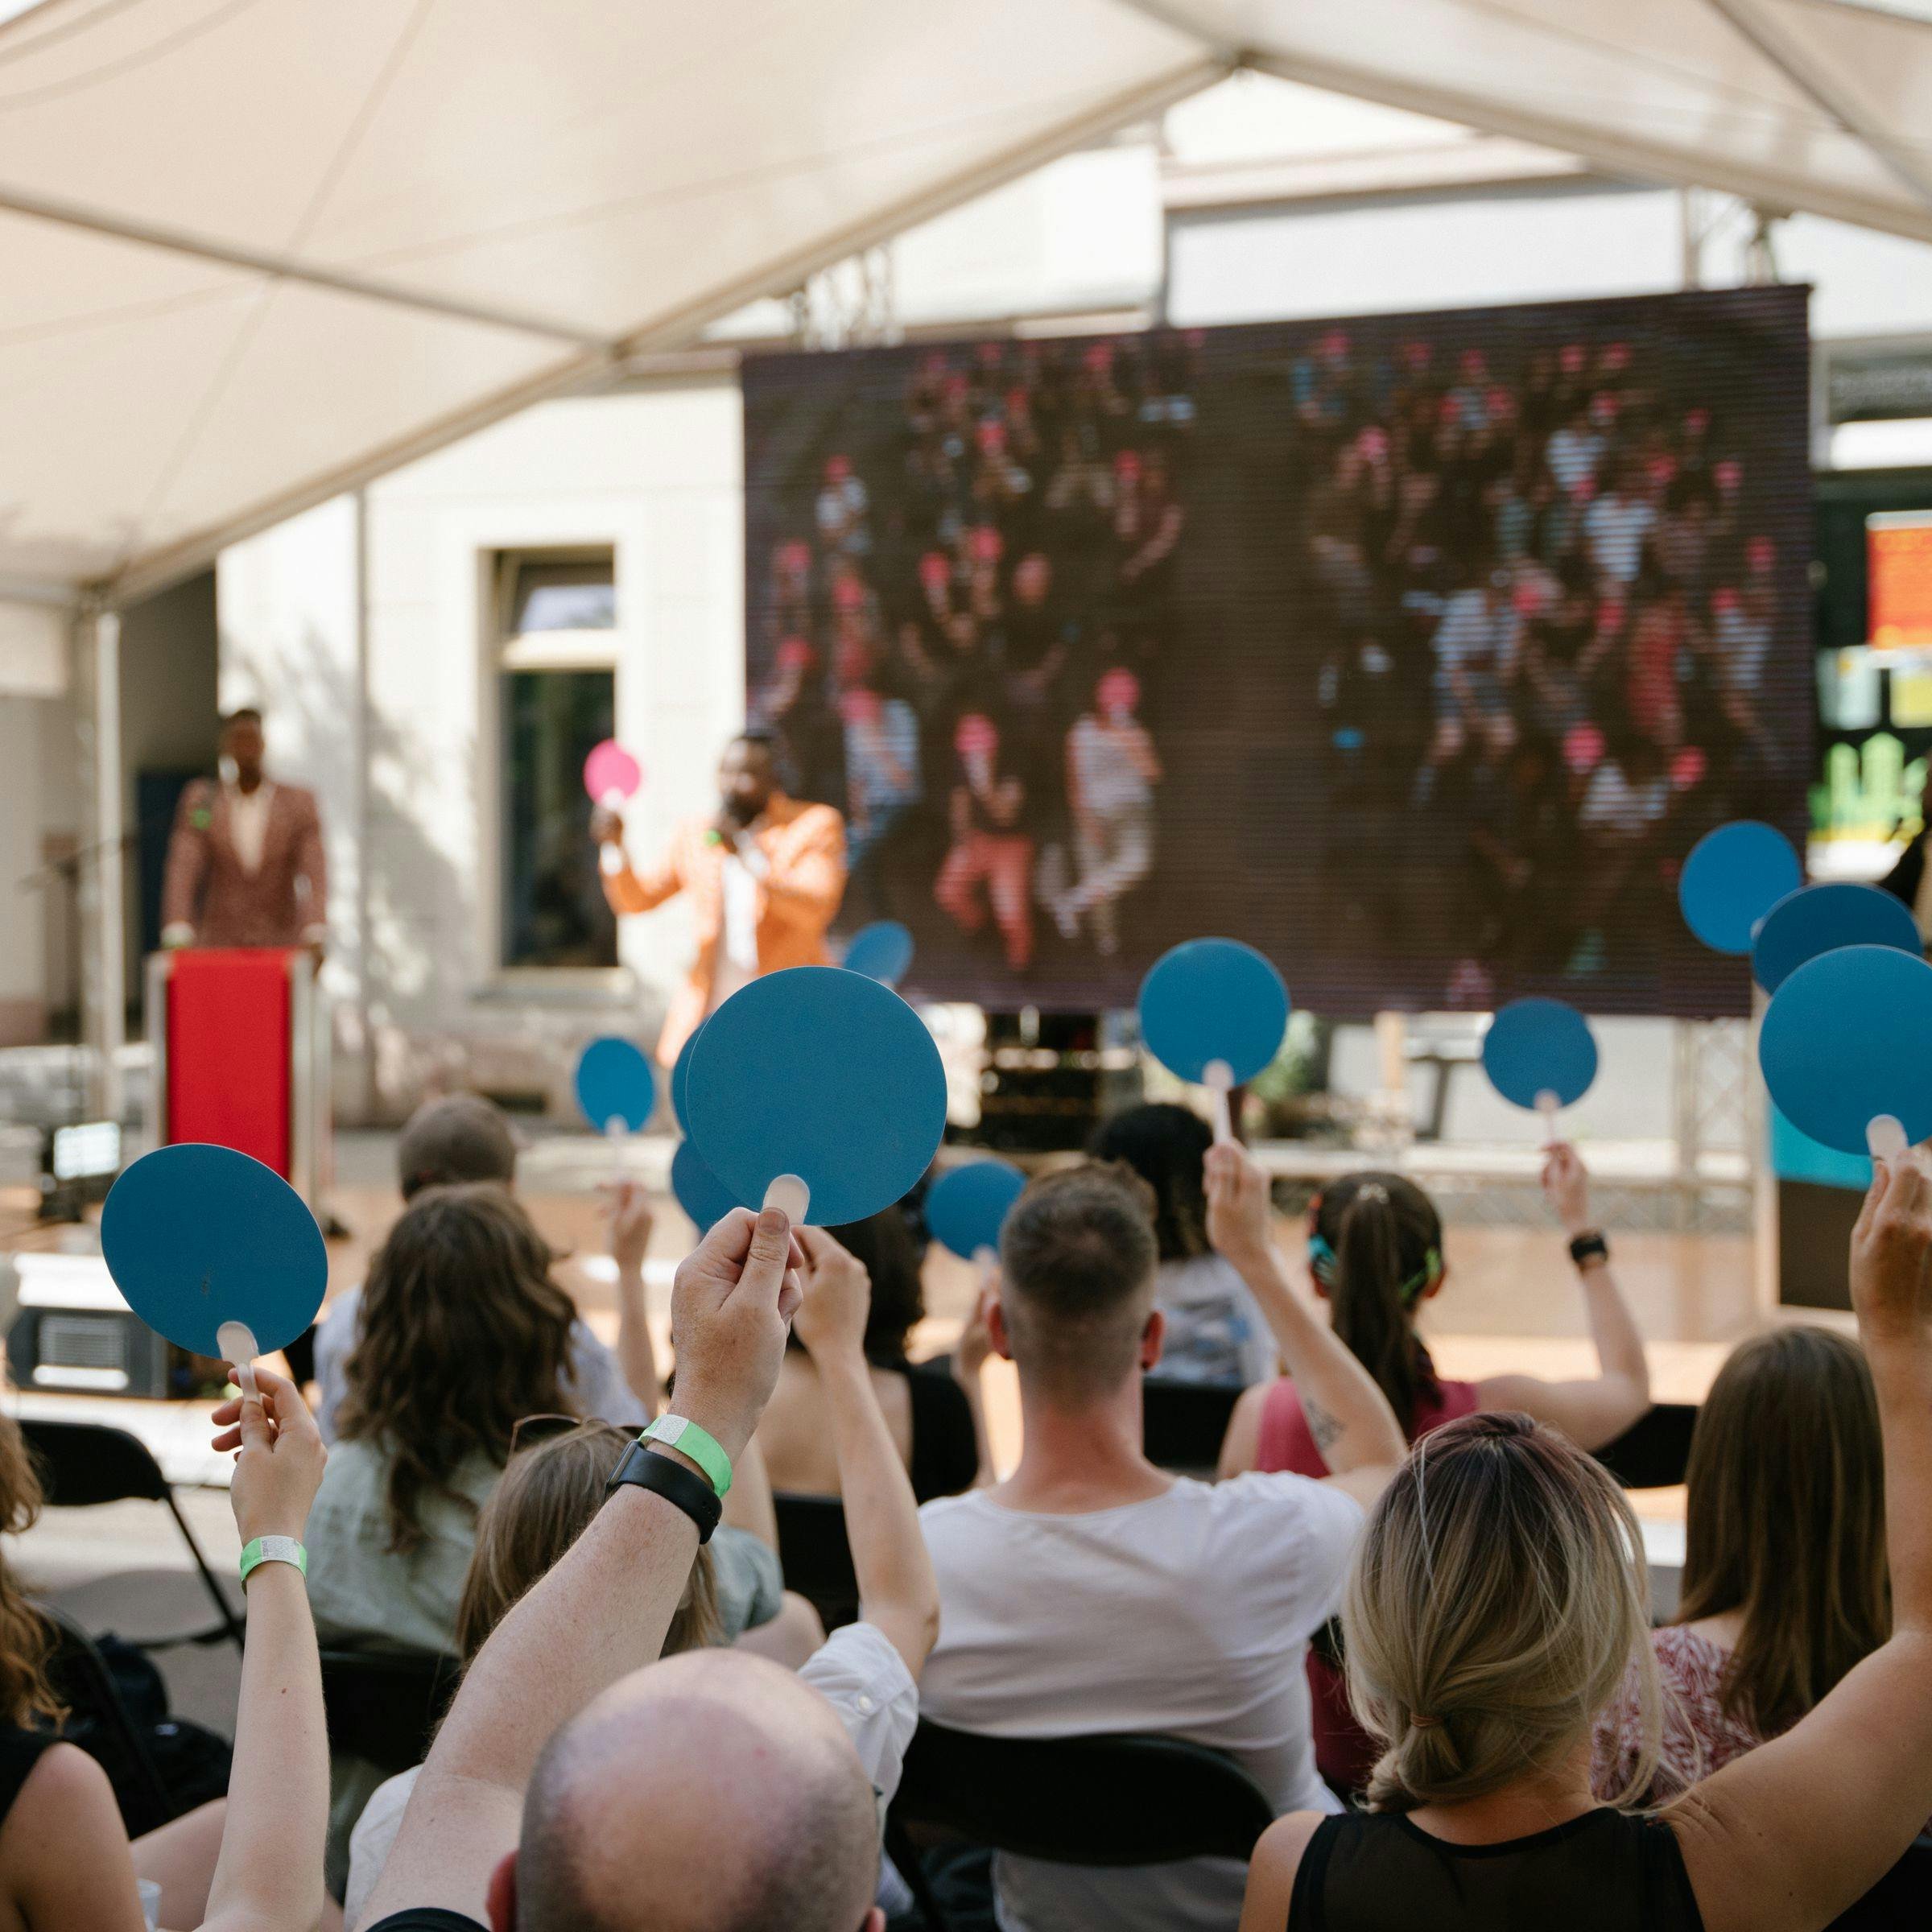 In an outdoor discussion format, the audience is photographed from behind as they hold up blue cards. In the background, the stage with the moderators can be seen.